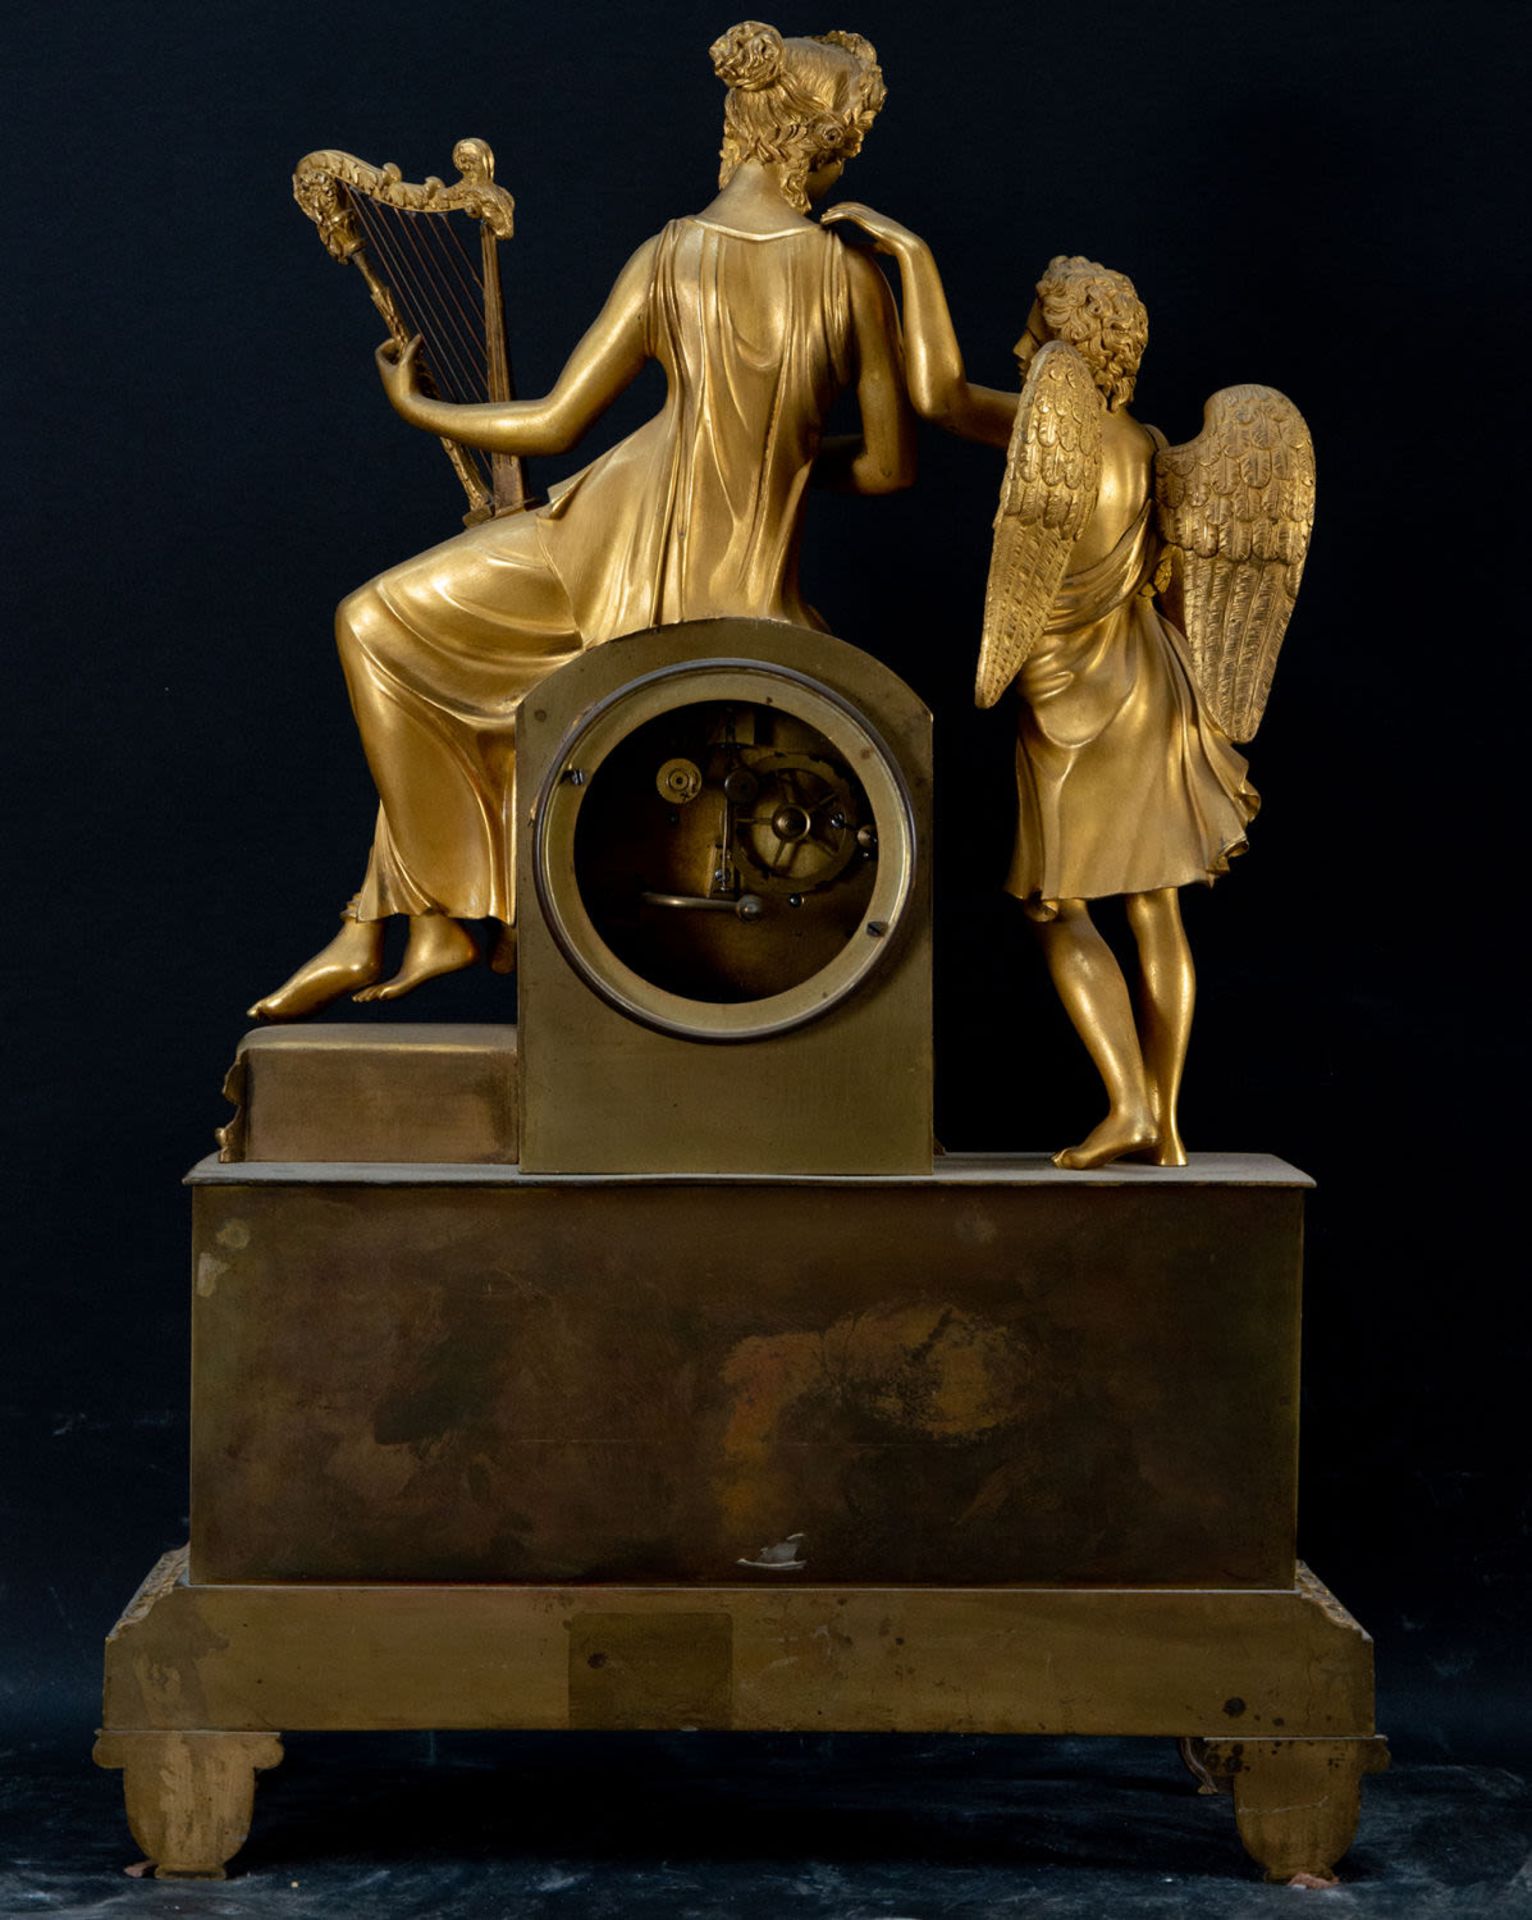 Large French Empire Clock in gilt bronze depicting Euterpe with Cupid, 19th century - Image 4 of 4